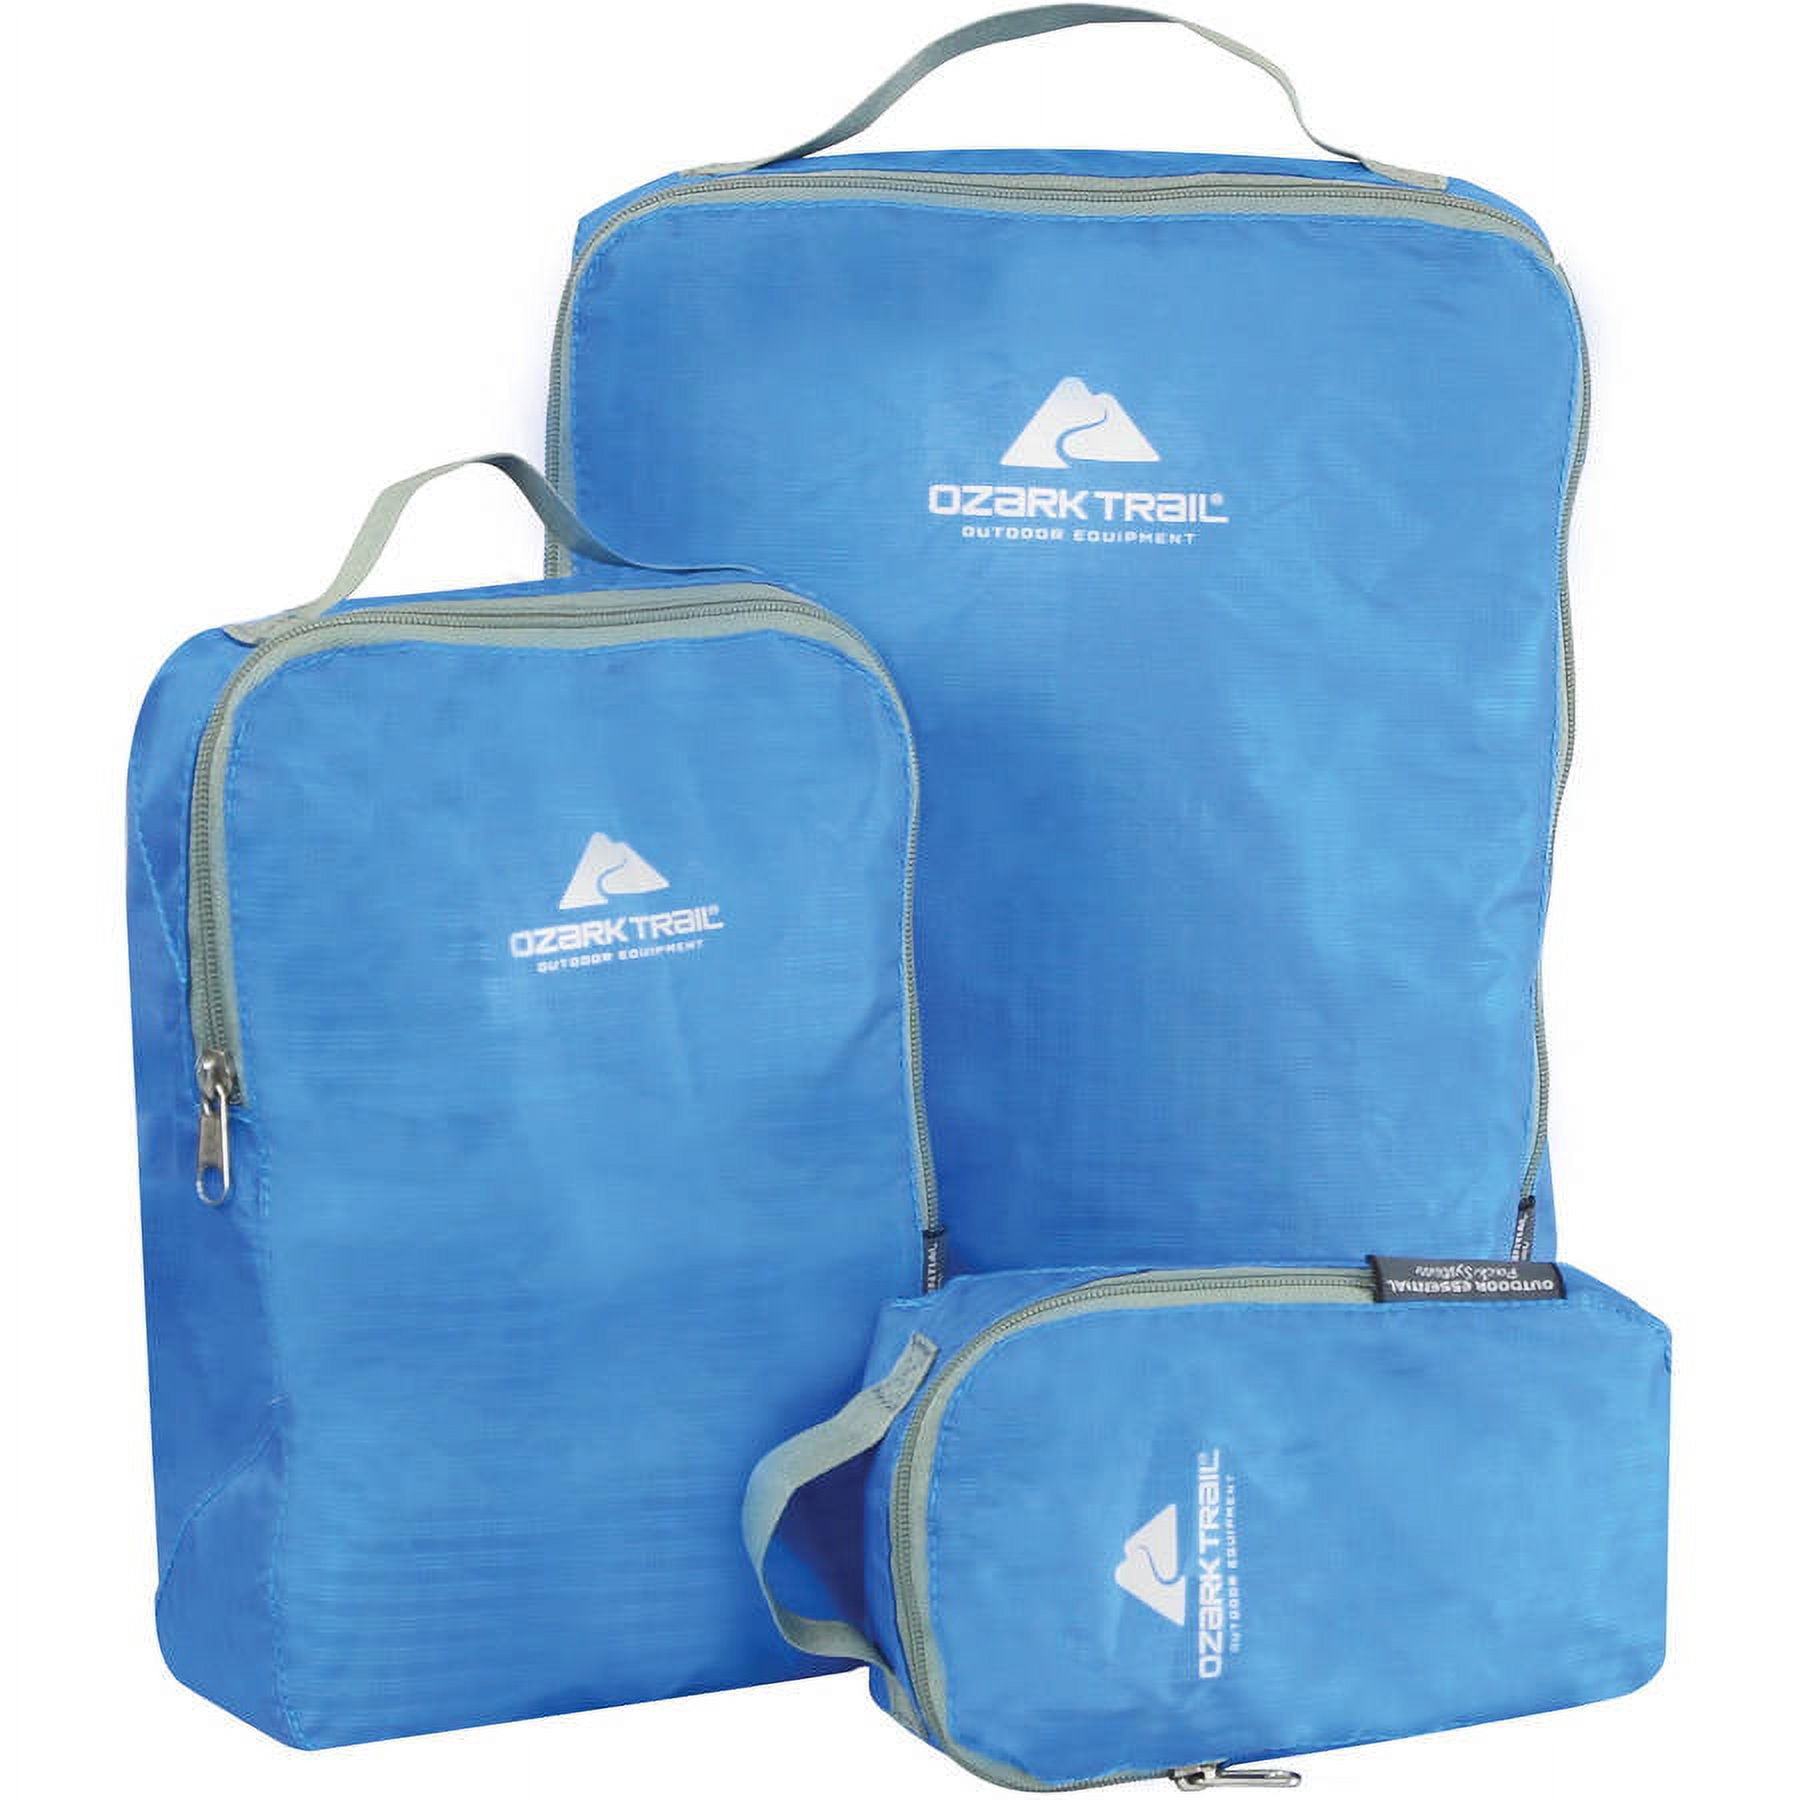 Ozark Trail Packing Cubes, 3pc Set - image 1 of 3